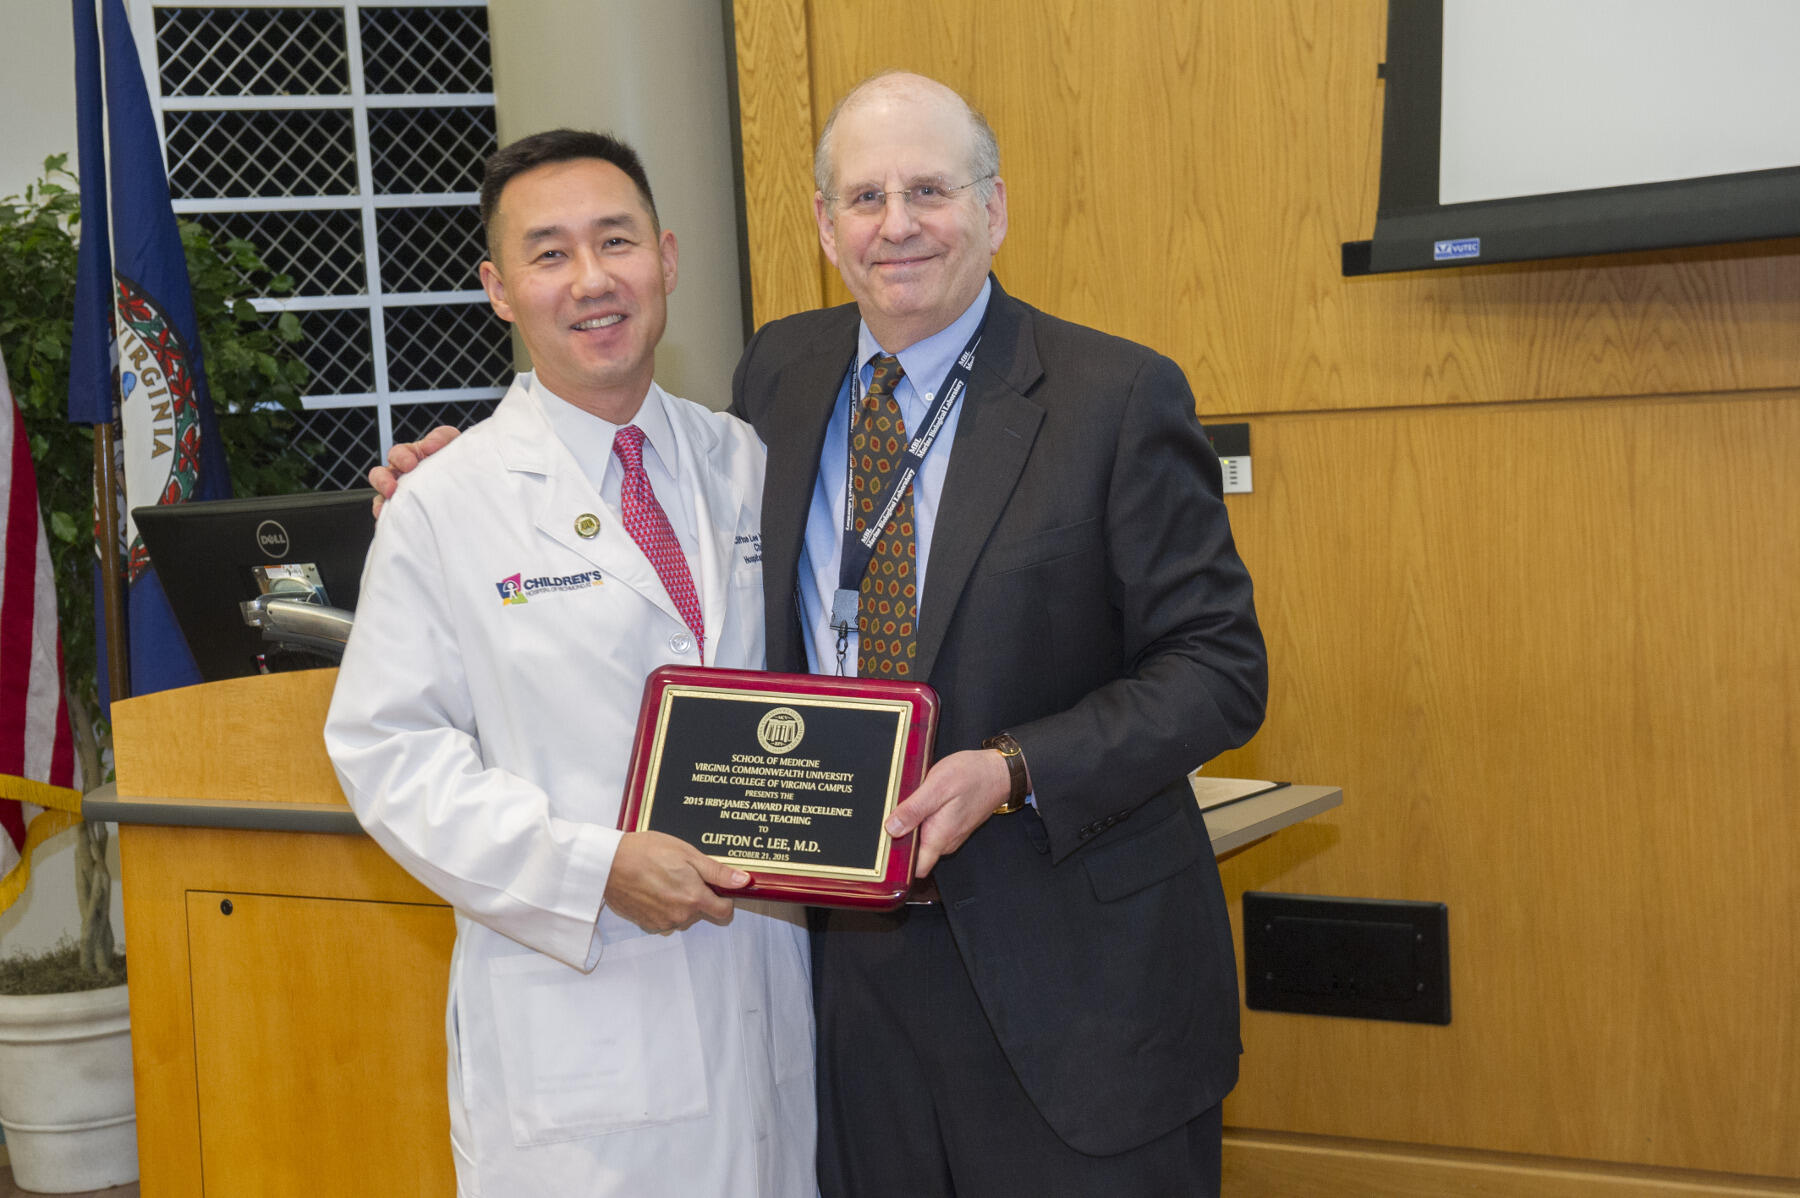 Clifton C. Lee (left), M.D., associate professor in the Department of Pediatrics and chief co-director of the pediatric clerkship at the Children’s Hospital of Richmond at VCU, was one of two recipients to win the Irby-James Award for Excellence in Clinical Teaching. Jerome Strauss (right), M.D., Ph.D., dean of the VCU School of Medicine, presented the award.  